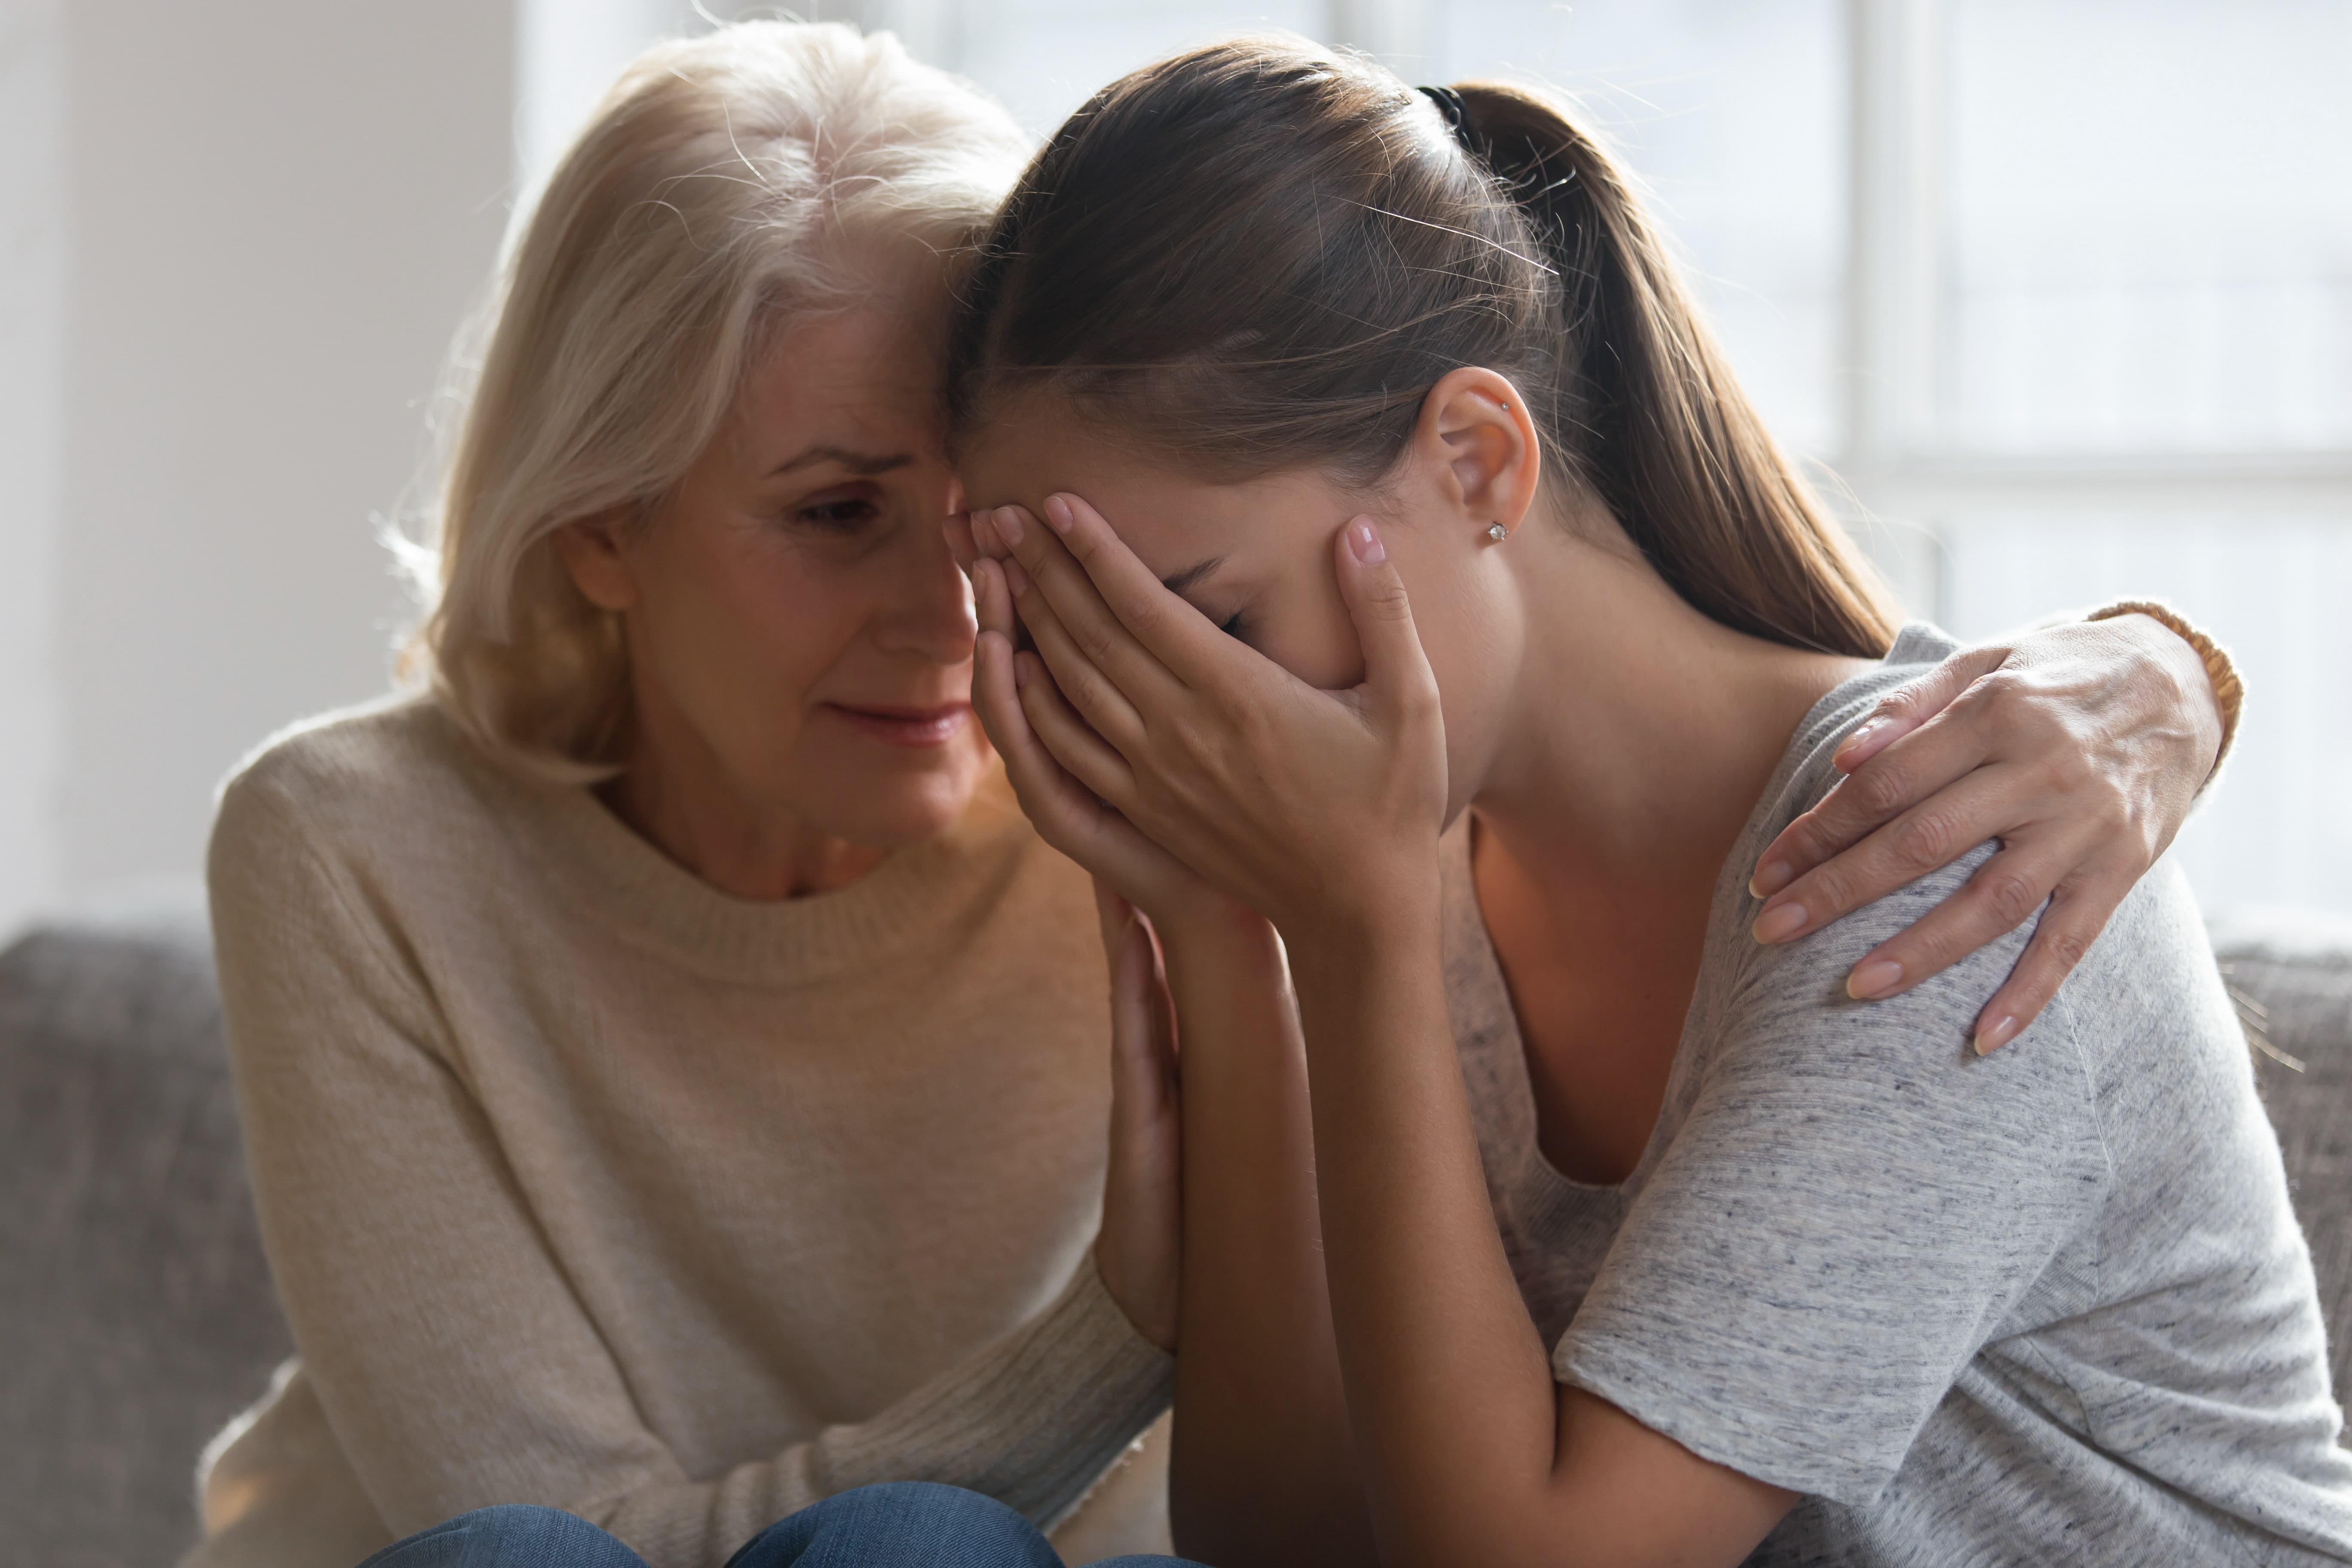 Grief Survival Guide: How to Talk About Loss